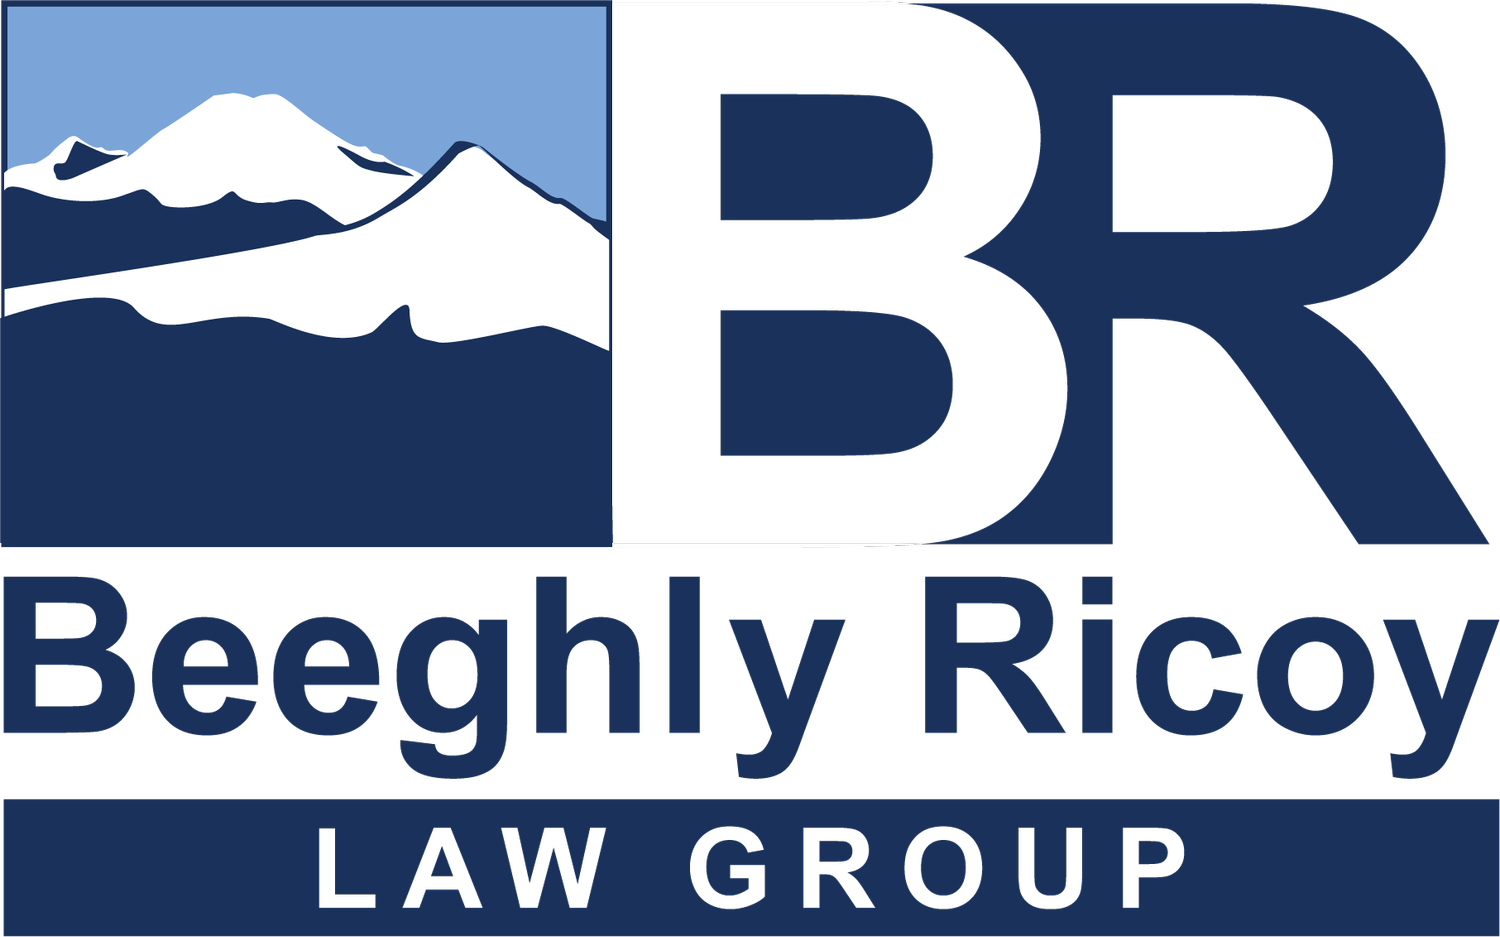 Beeghly Ricoy Law Group